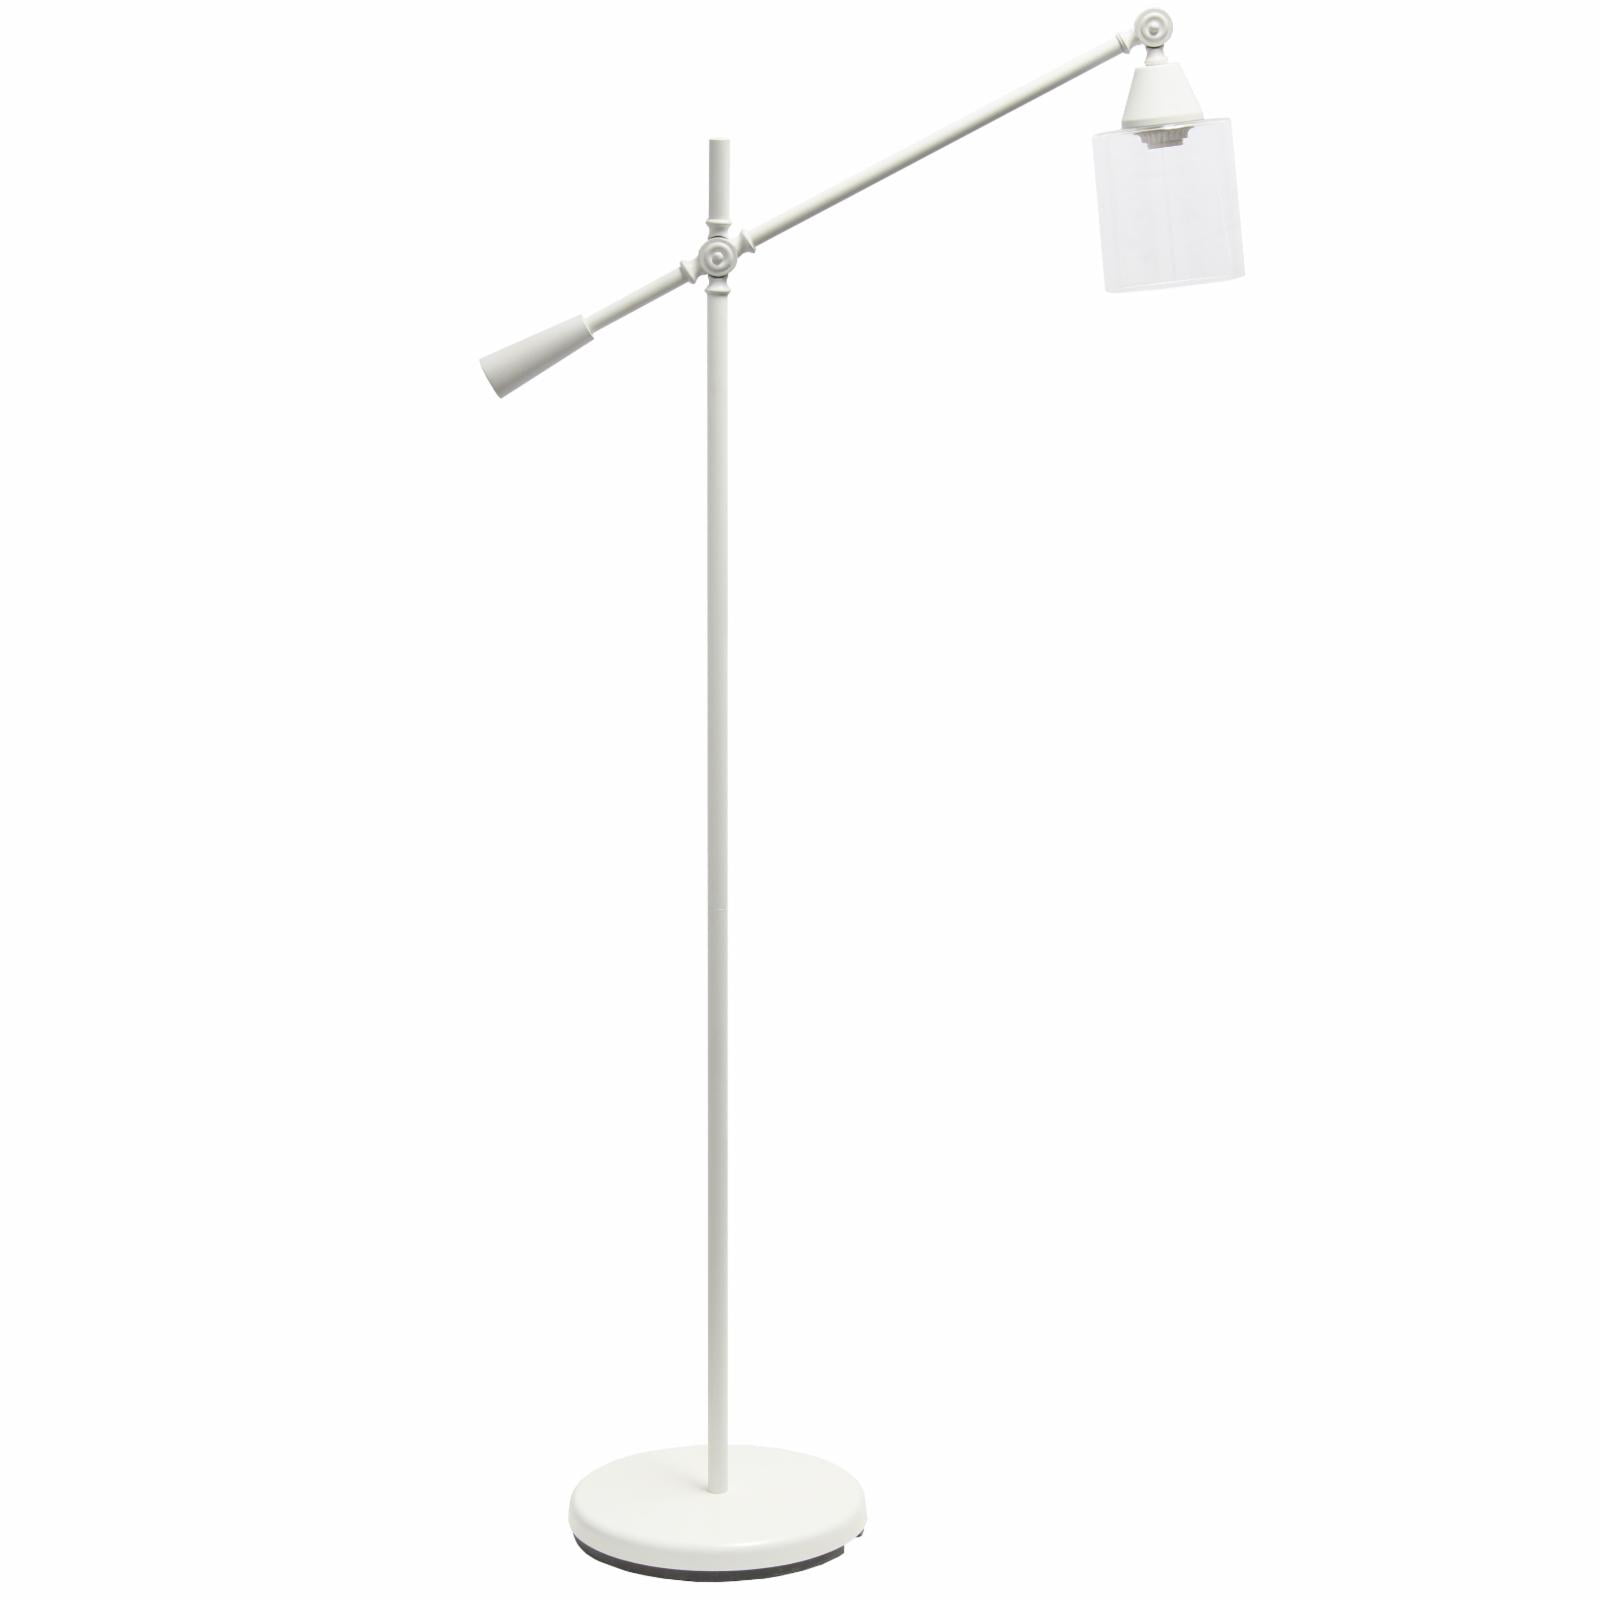 Lalia Home Swing Arm Floor Lamp with Clear Glass Cylindrical Shade, White